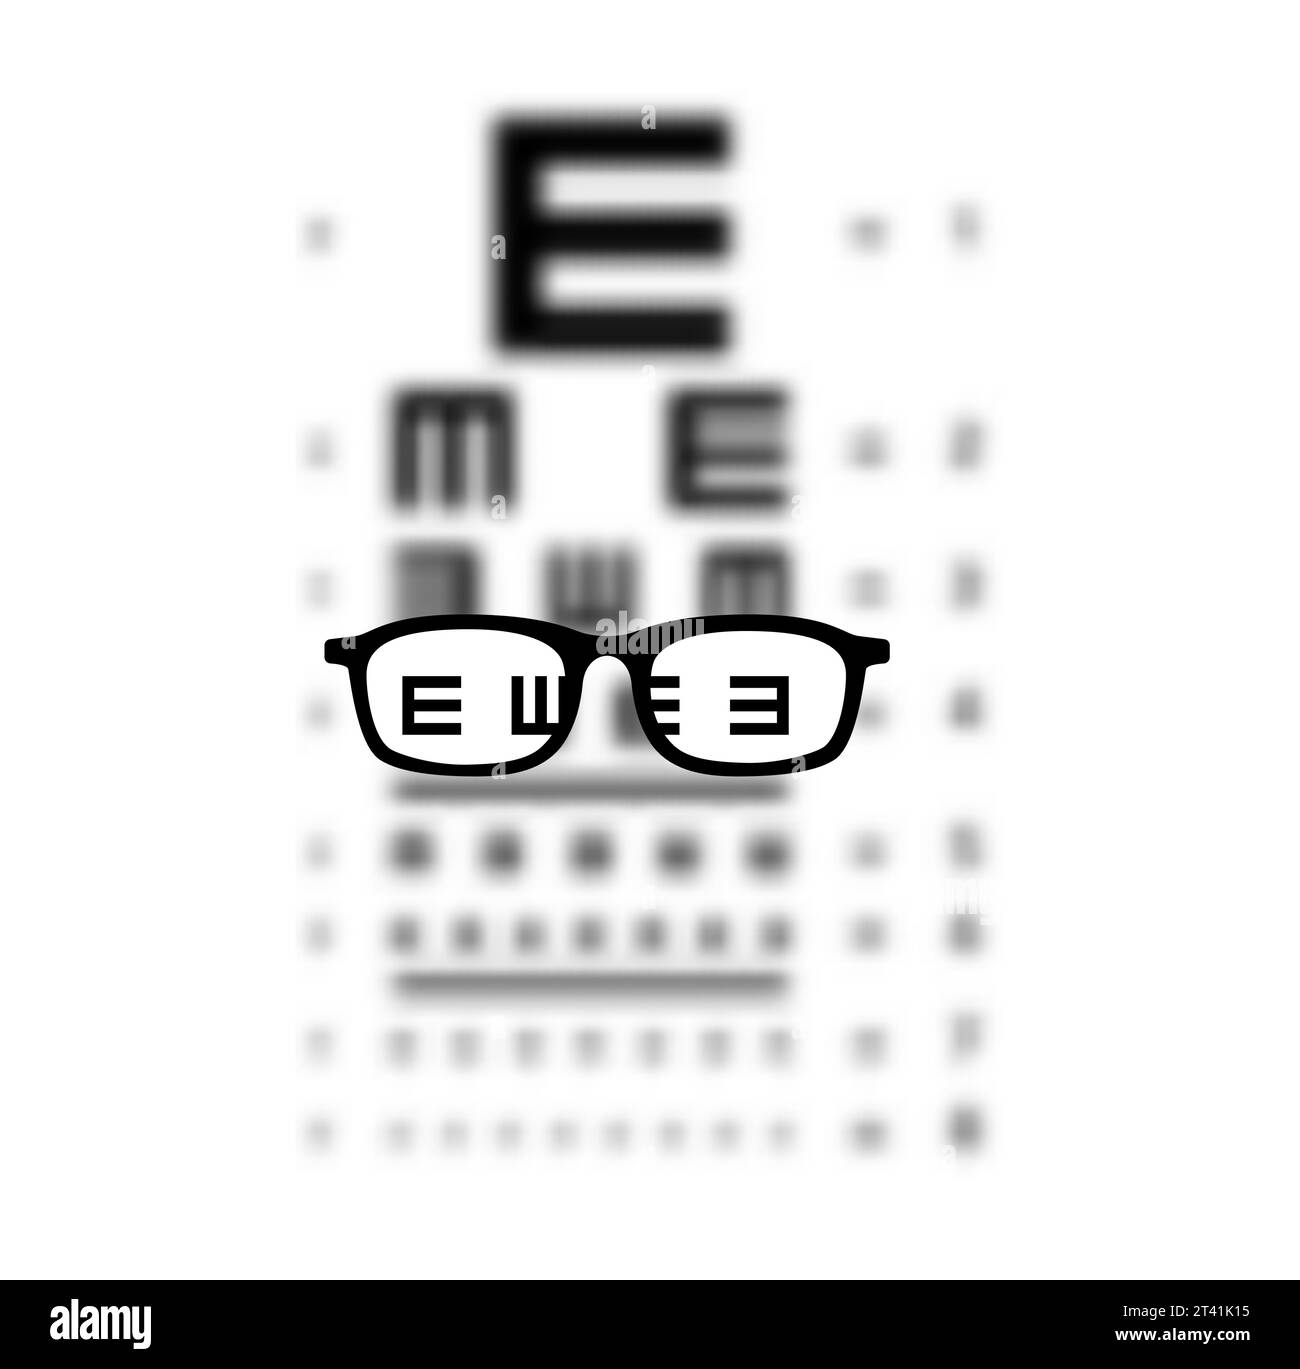 Glasses Optician In E chart Eye test blurred, Vision Of Eyesight medical ophthalmologist Optometry testing board chart vector illustration style, sketch outline isolated on white background Stock Vector